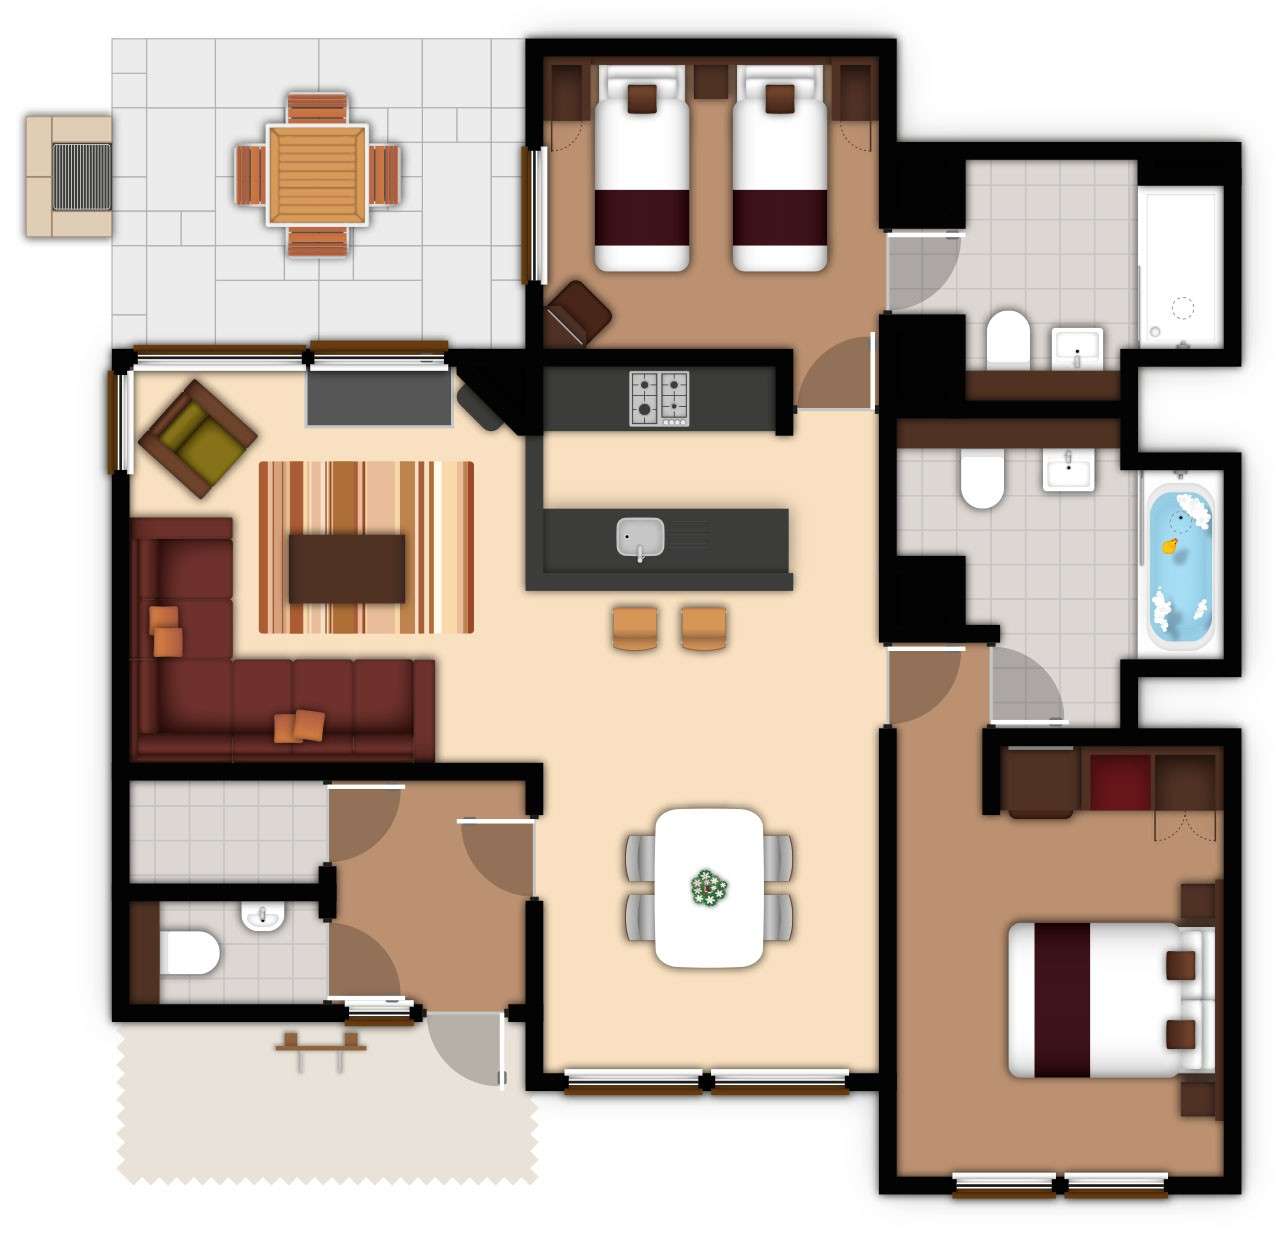 A detailed lodge floor plan illustration showing bedrooms, bathrooms, living area, kitchen, and outdoor space. If you require further assistance viewing the floor plan or need further information on the accommodation type please contact Guest Services.